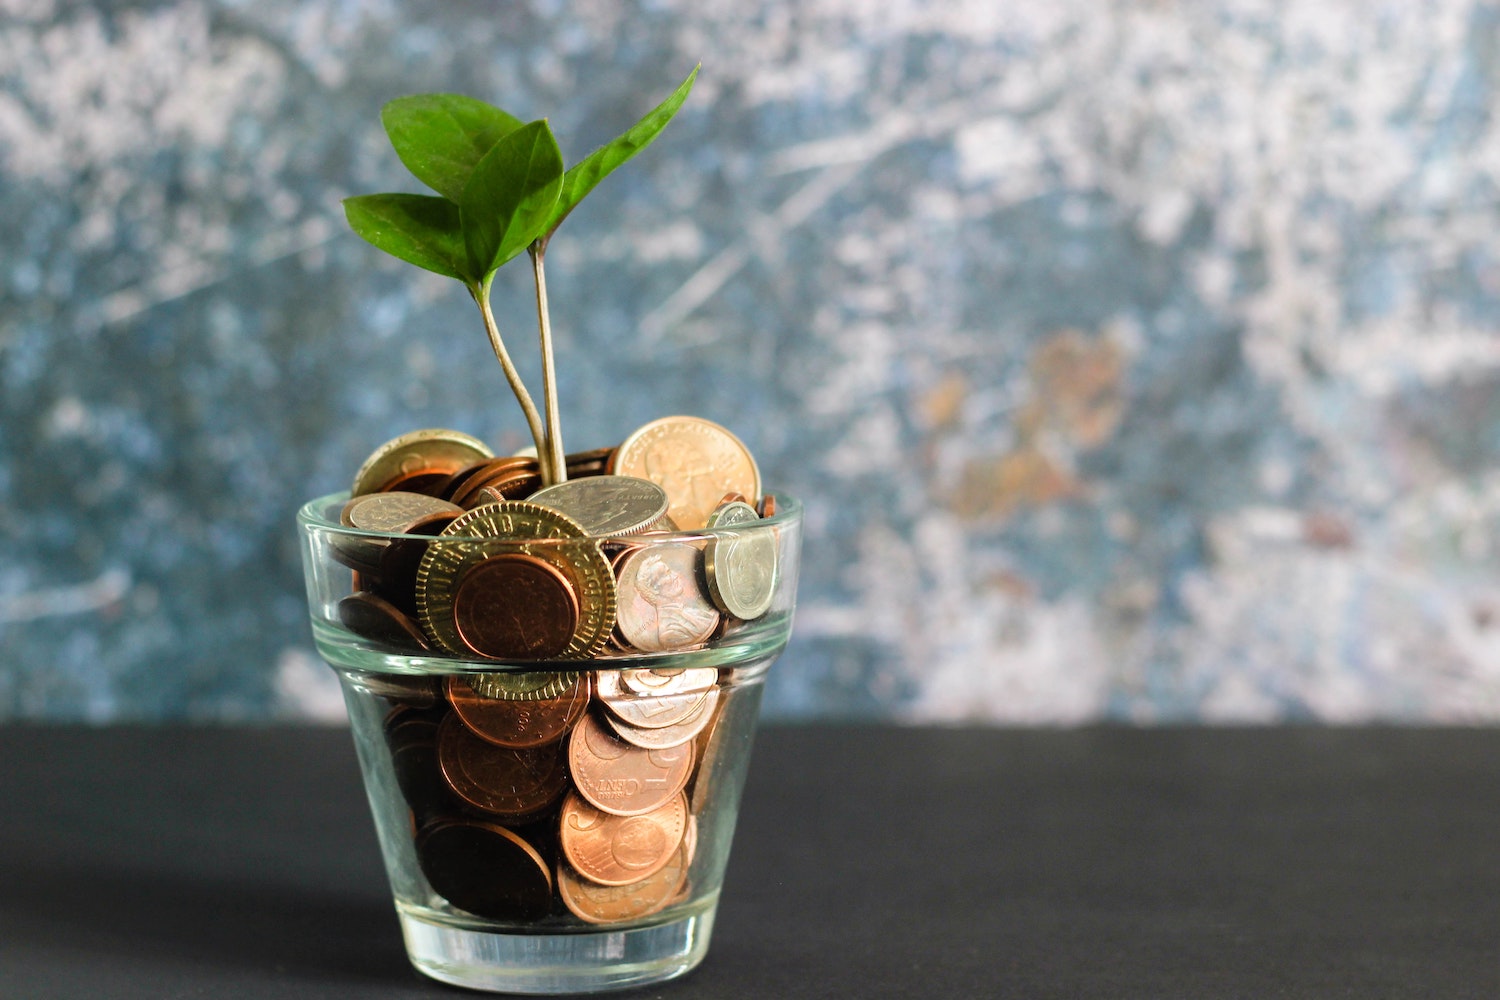 Coins in a jar with a plant